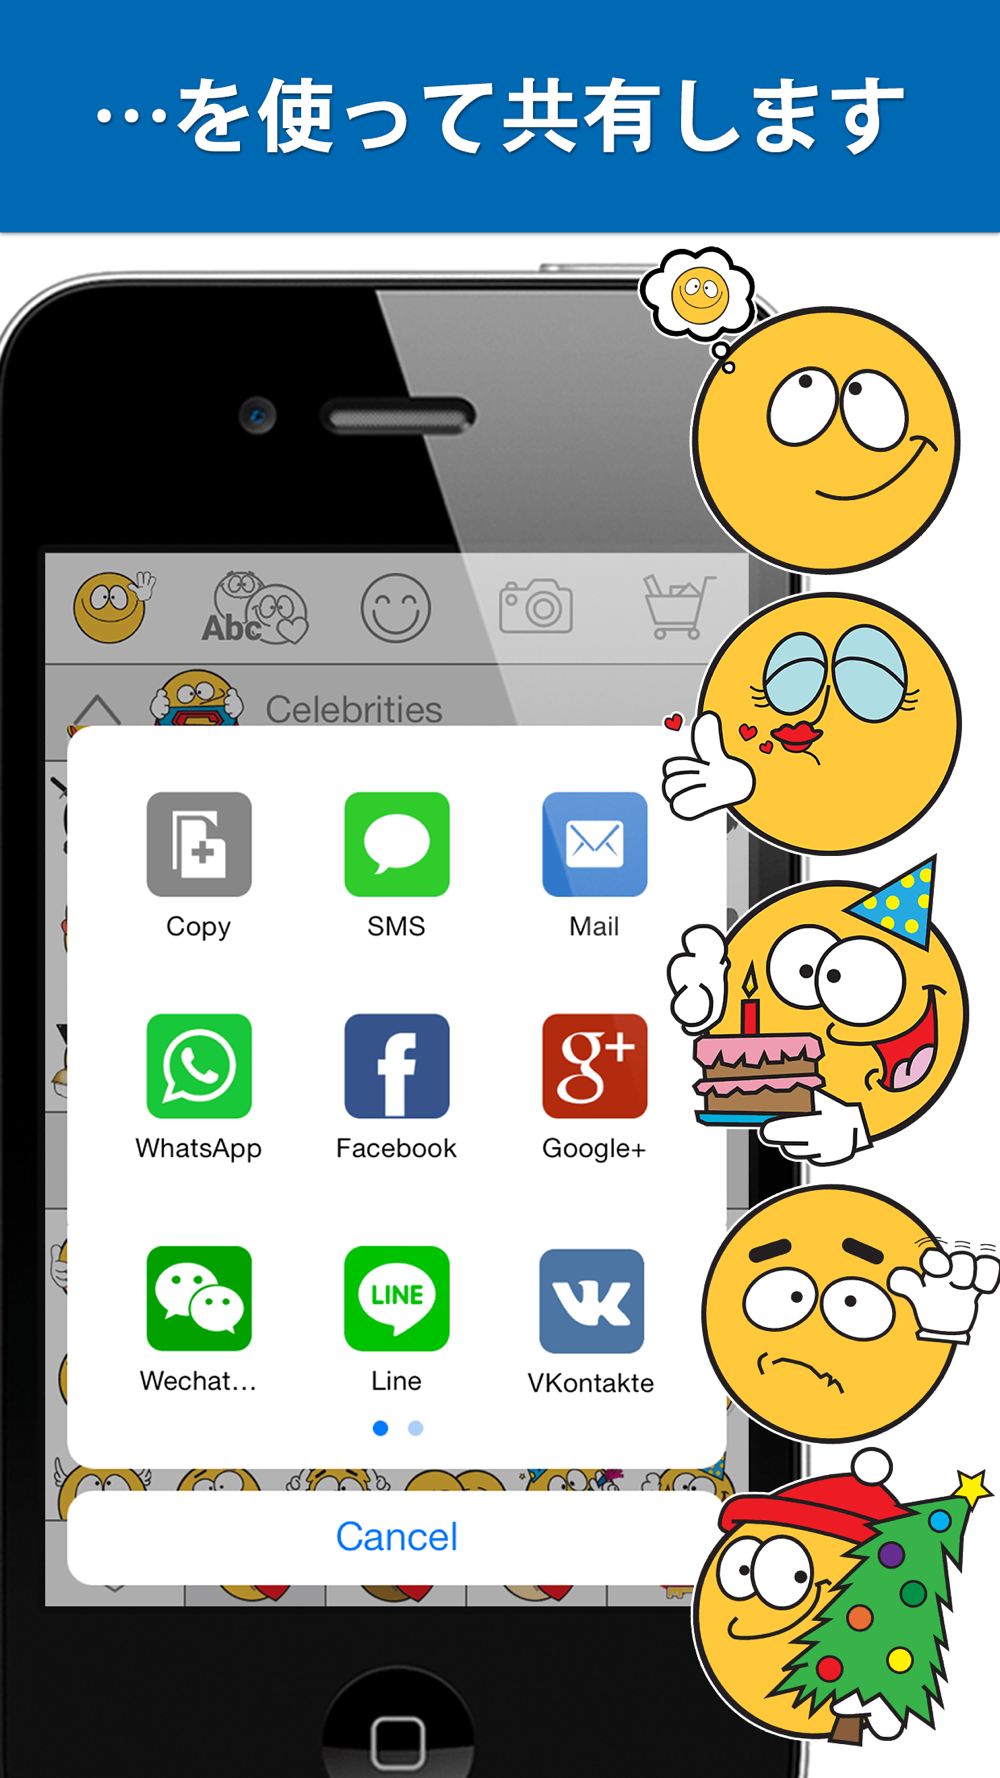 Emojidom 絵文字 顔文字 スマイリー ステッカー Free Download App For Iphone Steprimo Com